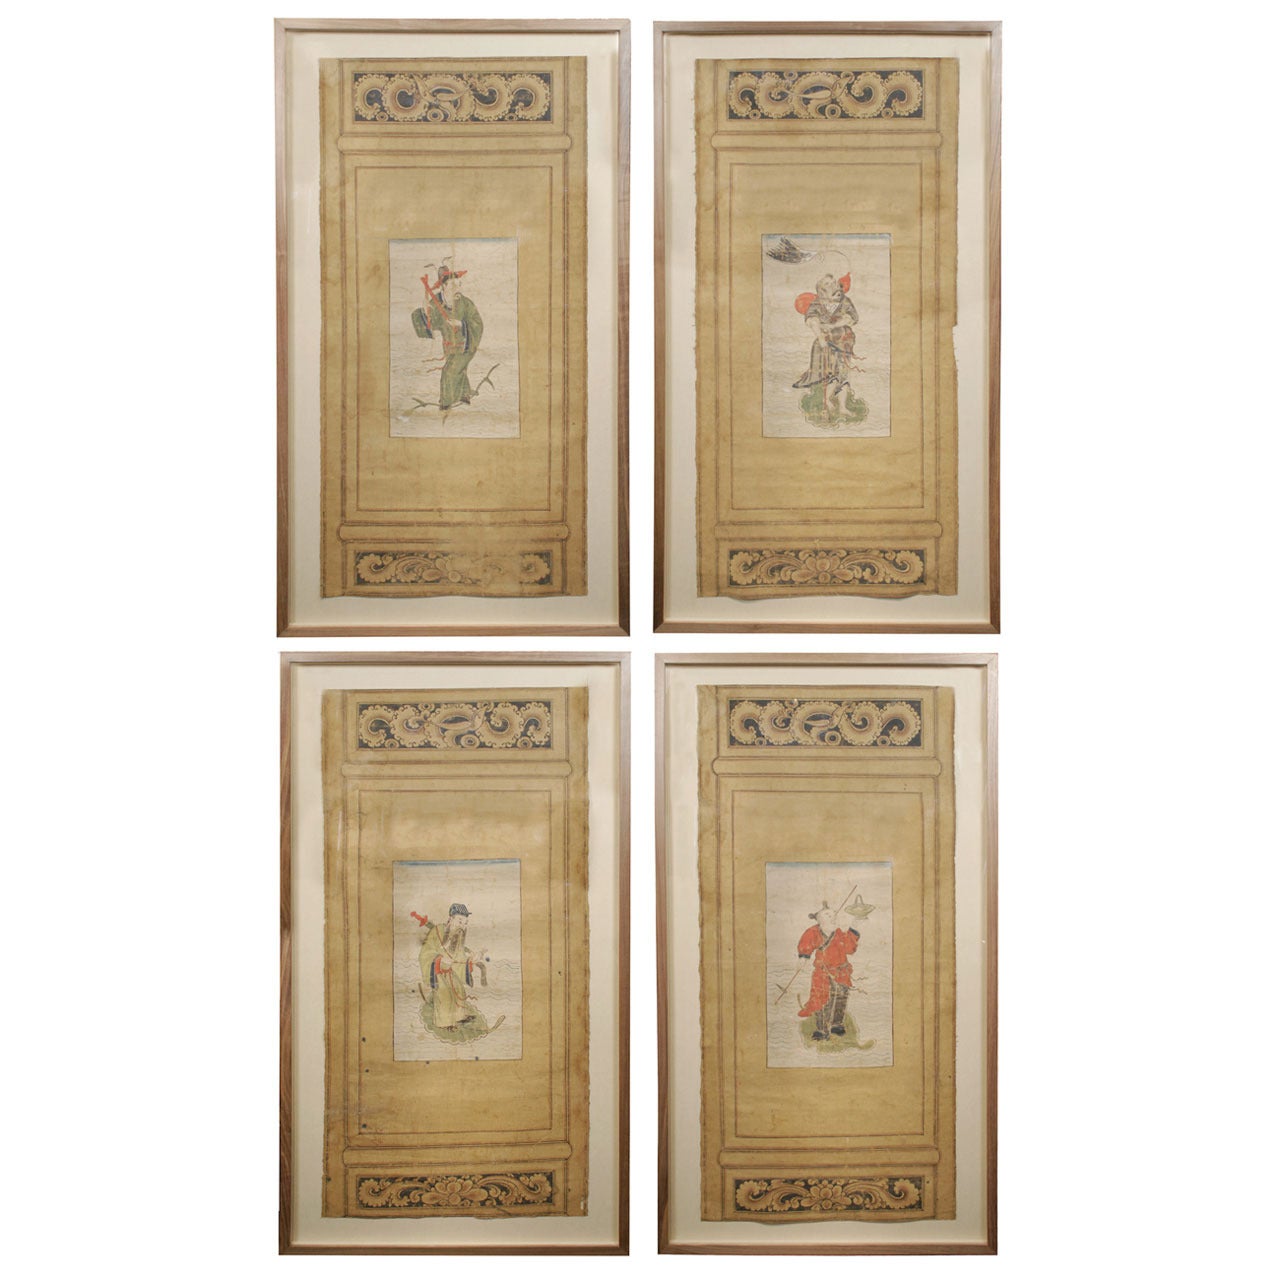 Set of Four Screen Paintings of Scholars